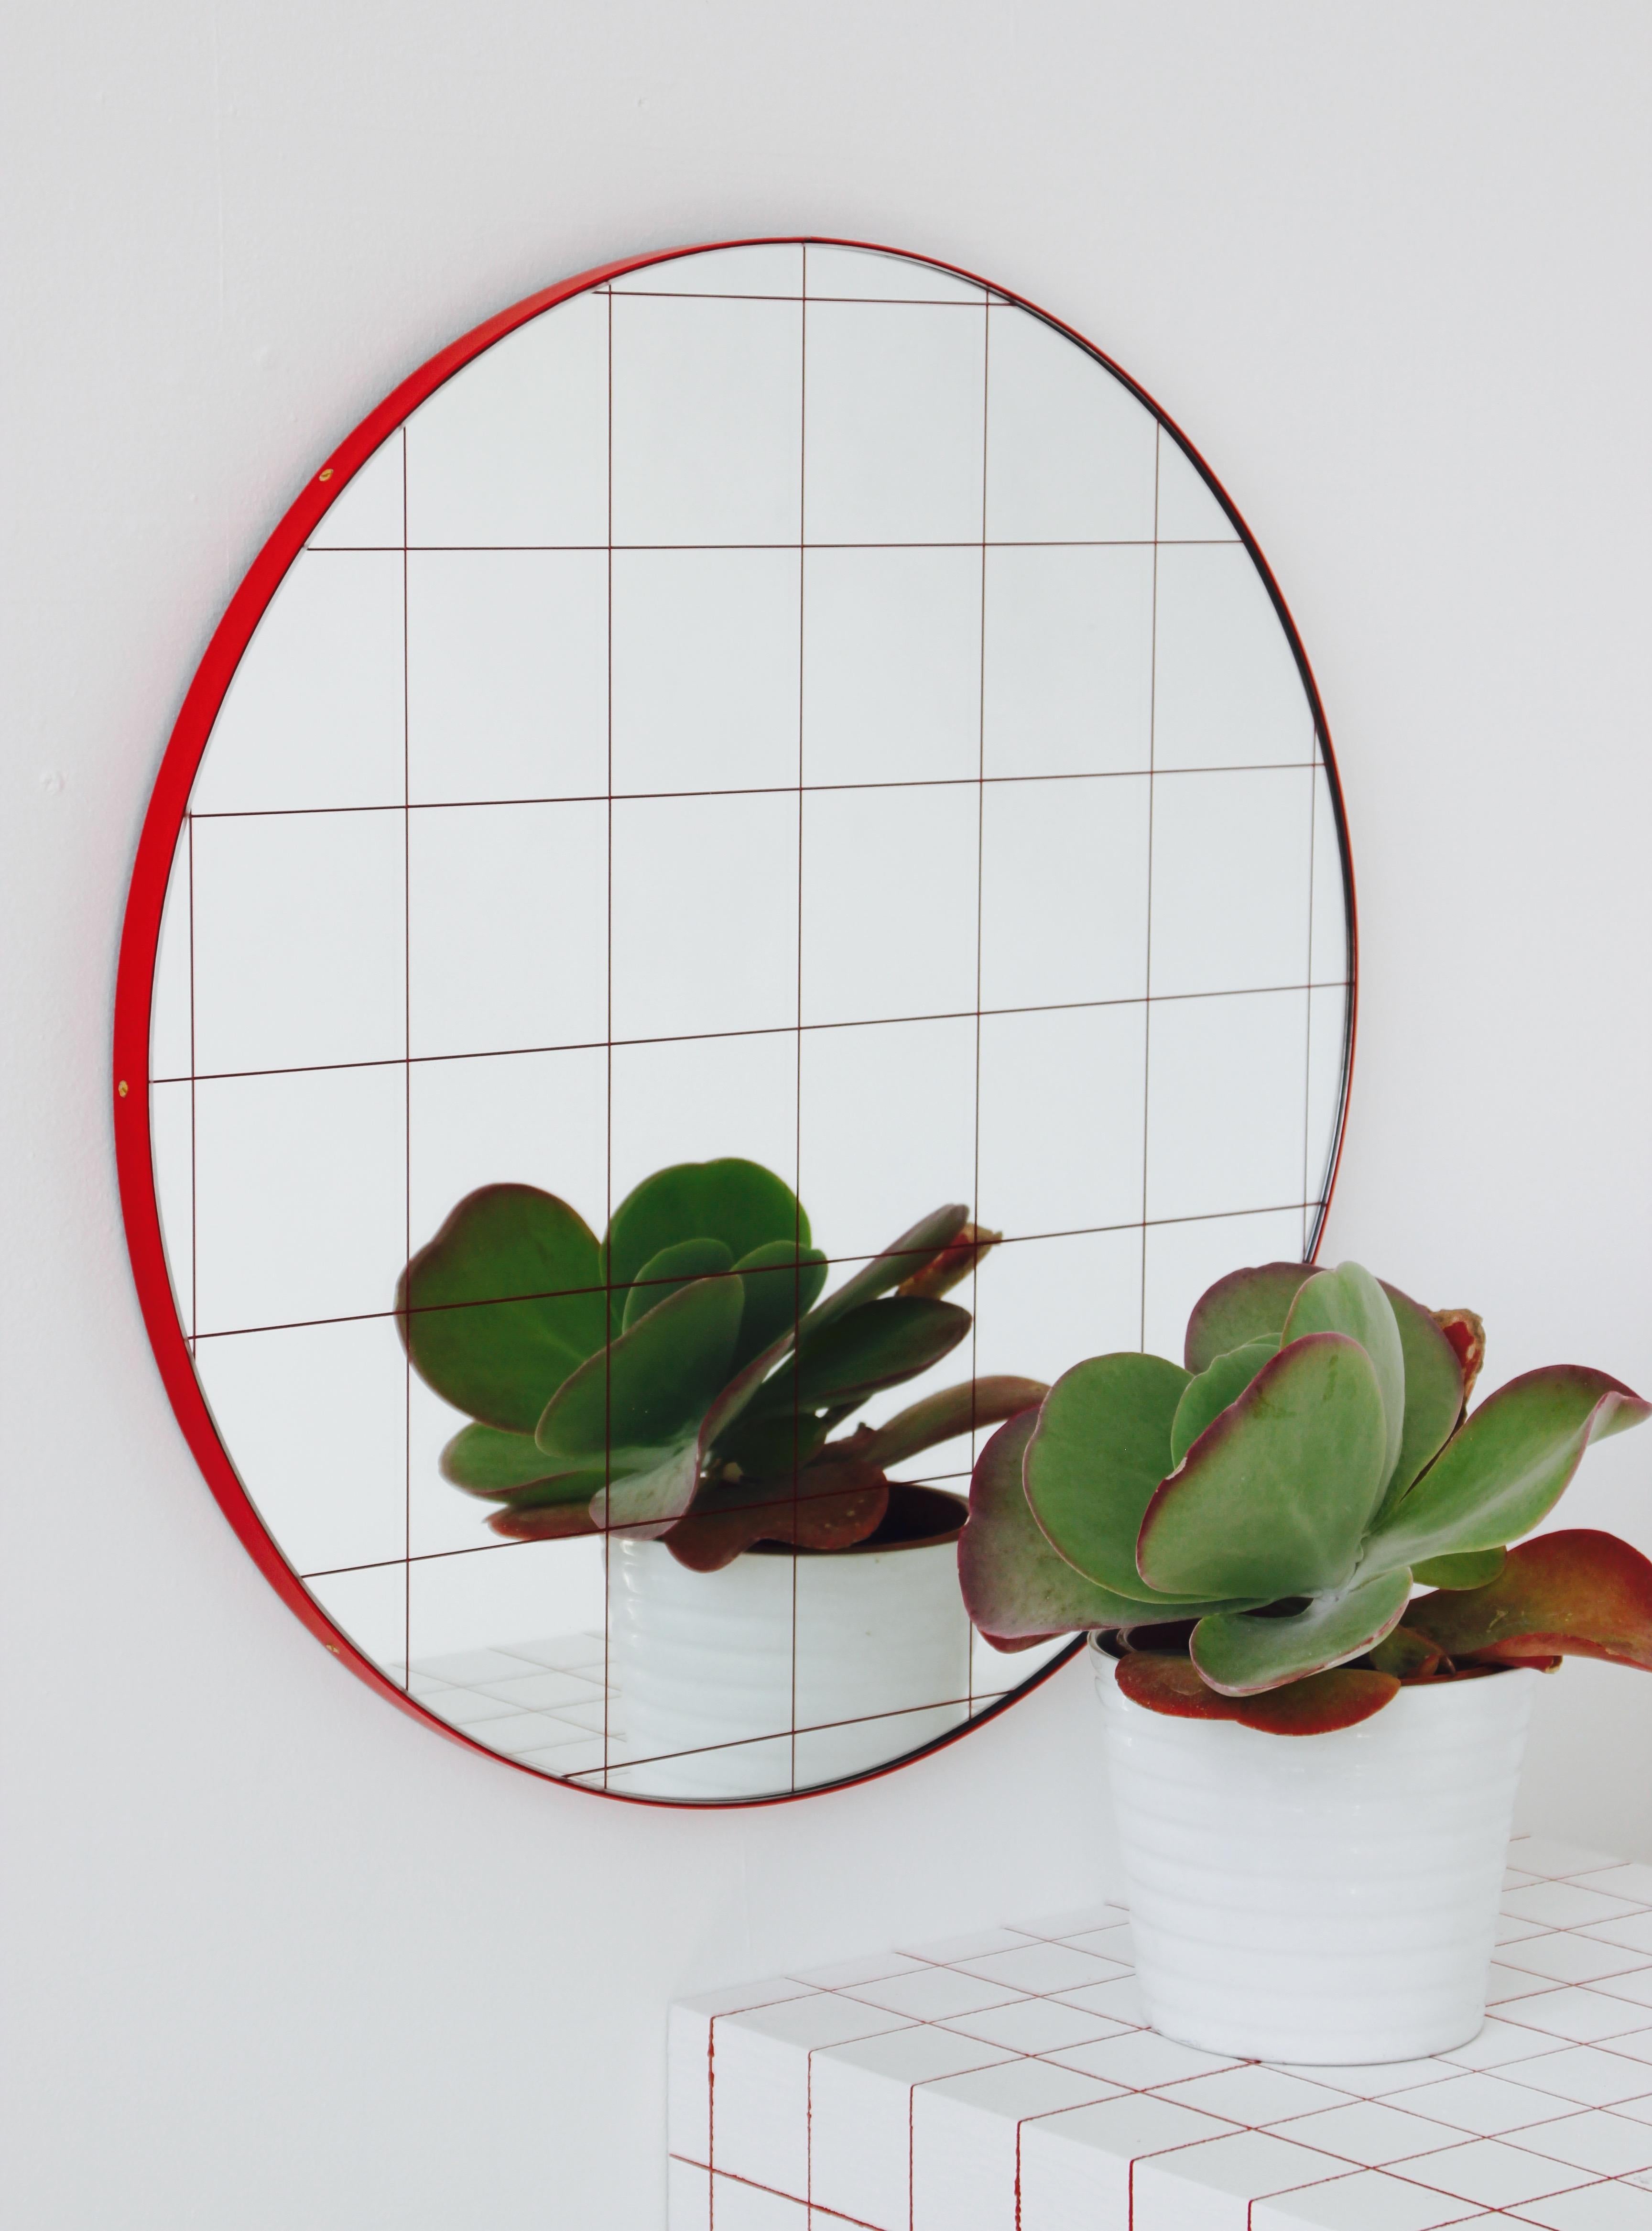 Modern decorative round Orbis mirror with a red grid and a powder coated red frame. Designed and handcrafted in London, UK.

Small and regular sizes (40 and 50cm) are fitted with a practical brass D ring hook. A Z bar system is available for all